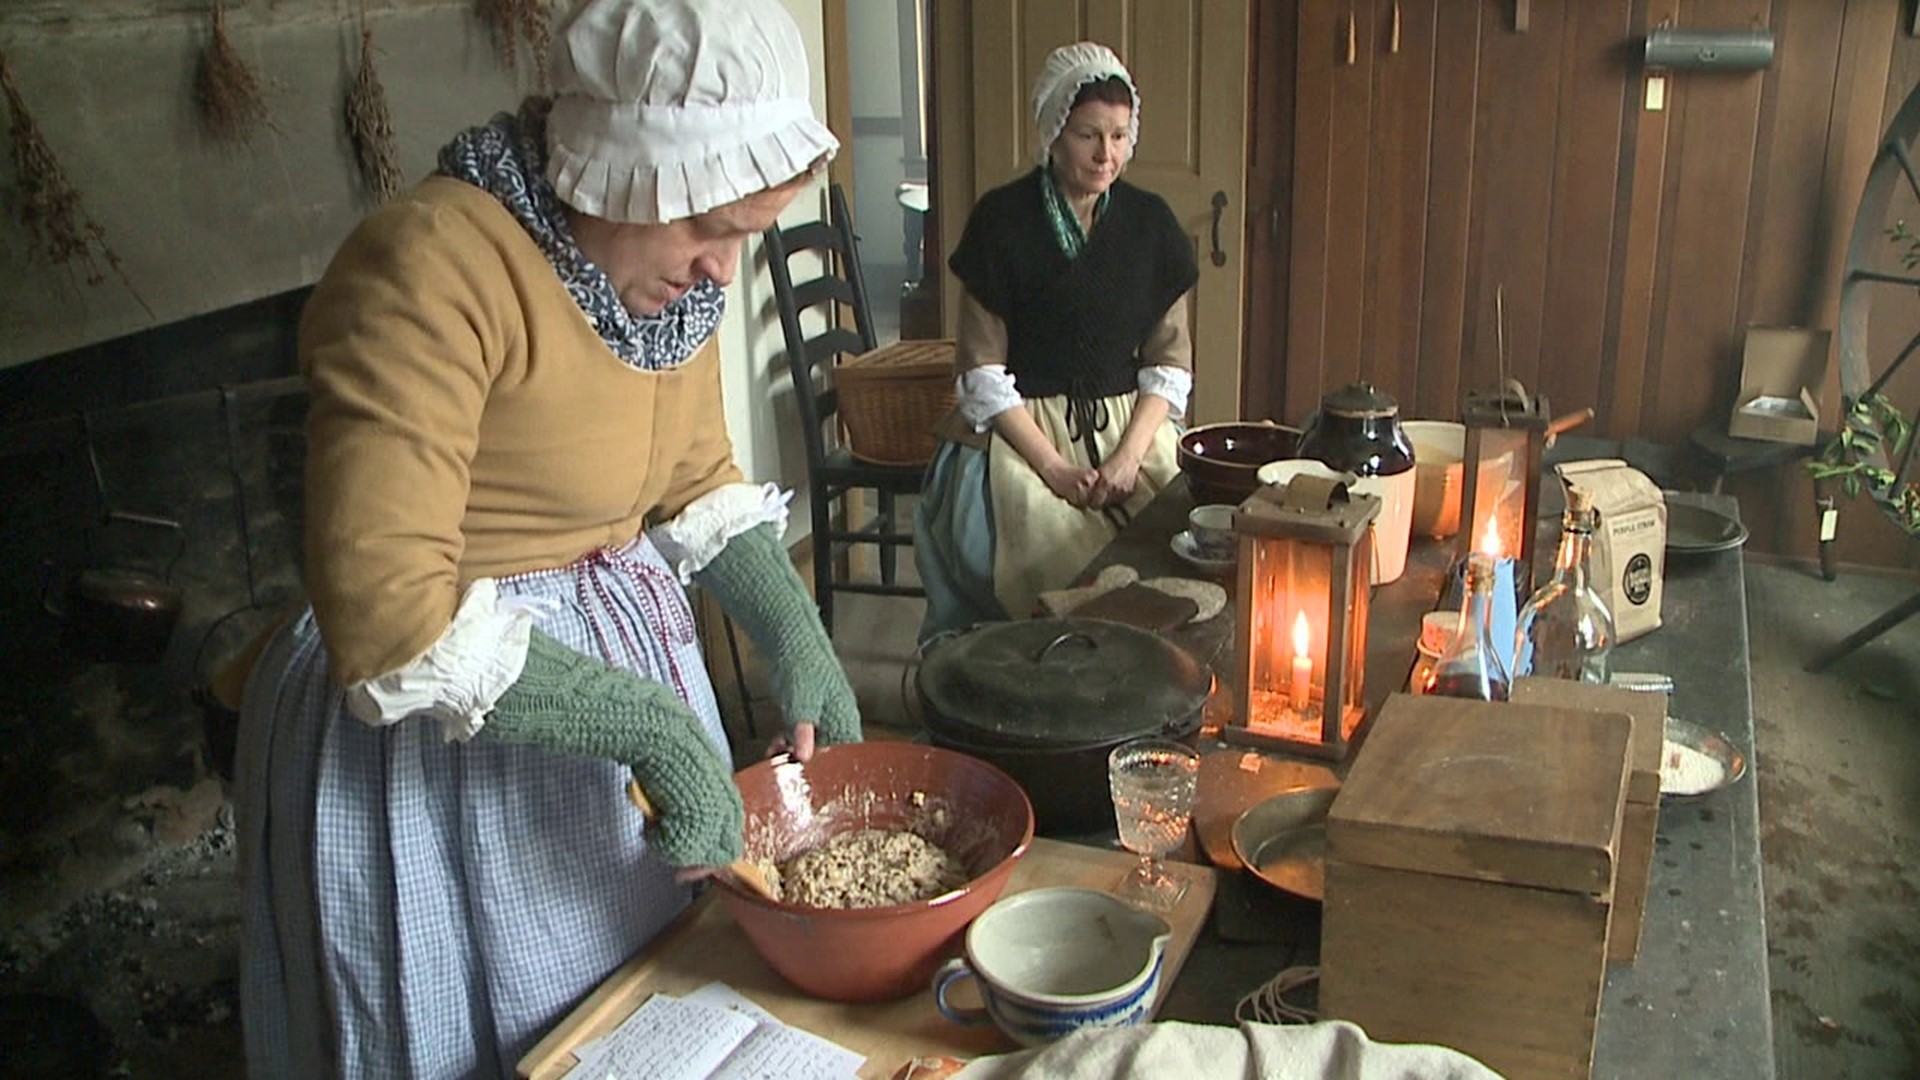 Folks got the chance to see how the holidays were celebrated back in the 18th century on Sunday.